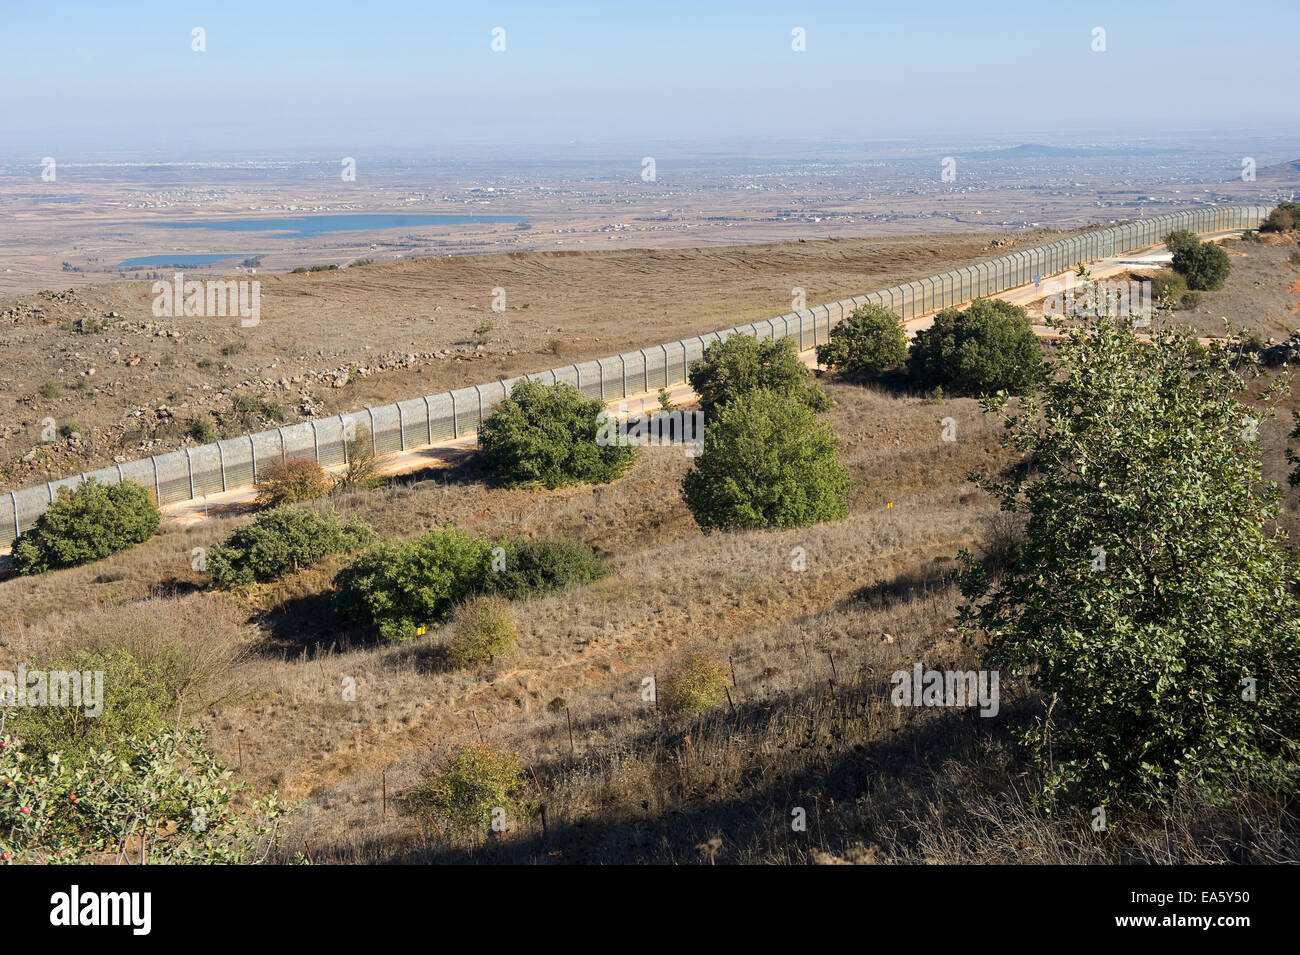 The fence of the border between Israel and Syria as seen from a hill on the Golan Heights in Israel Stock Photo